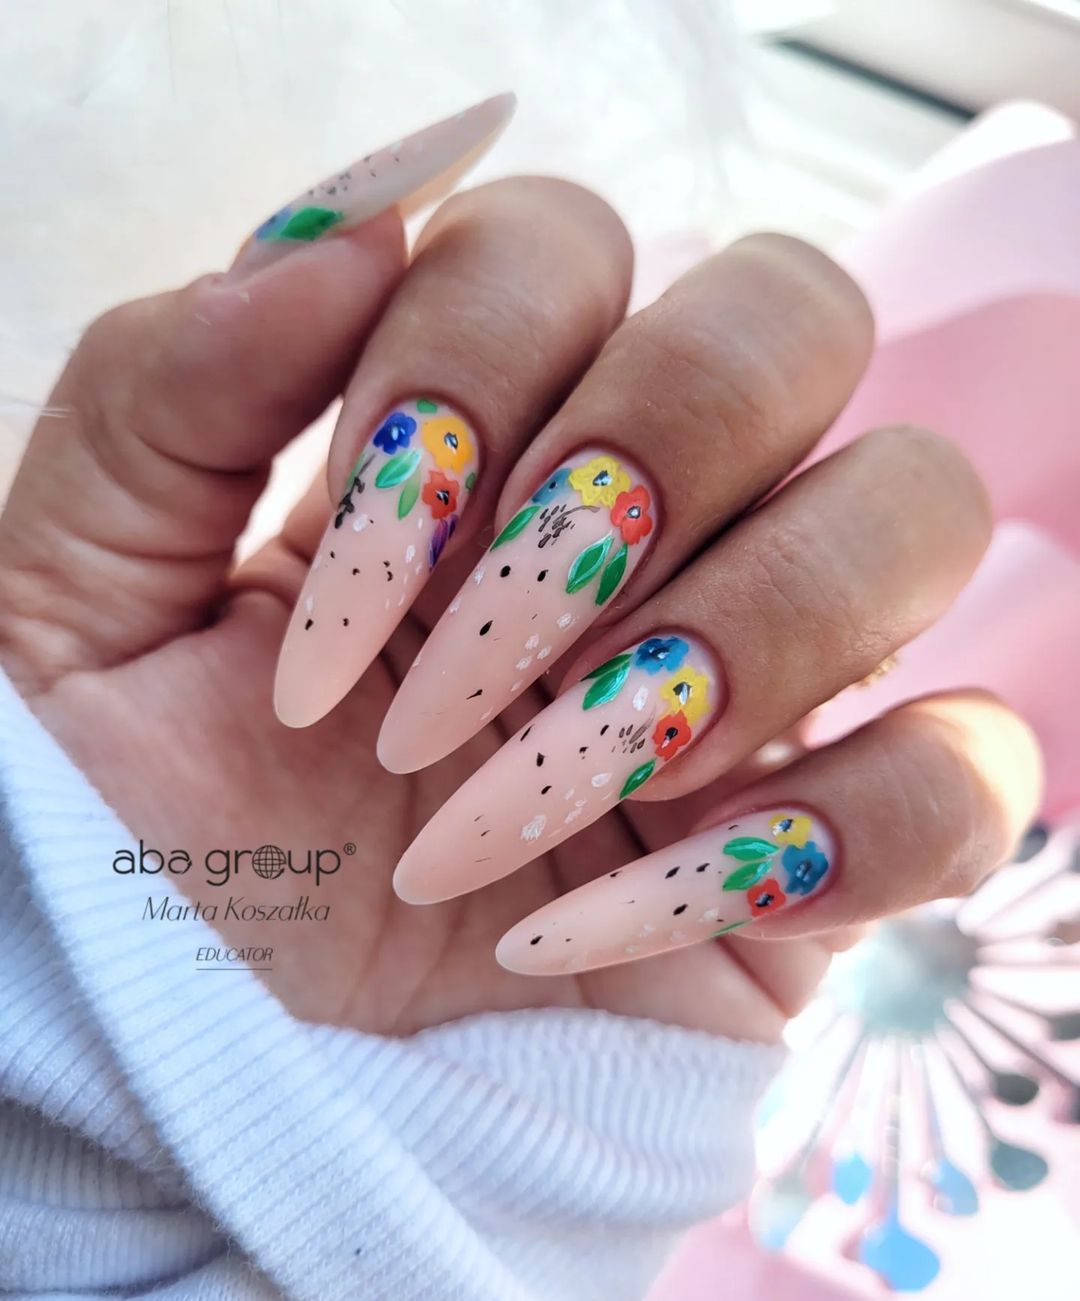 0Long Nude Almond Nails with Floral Design